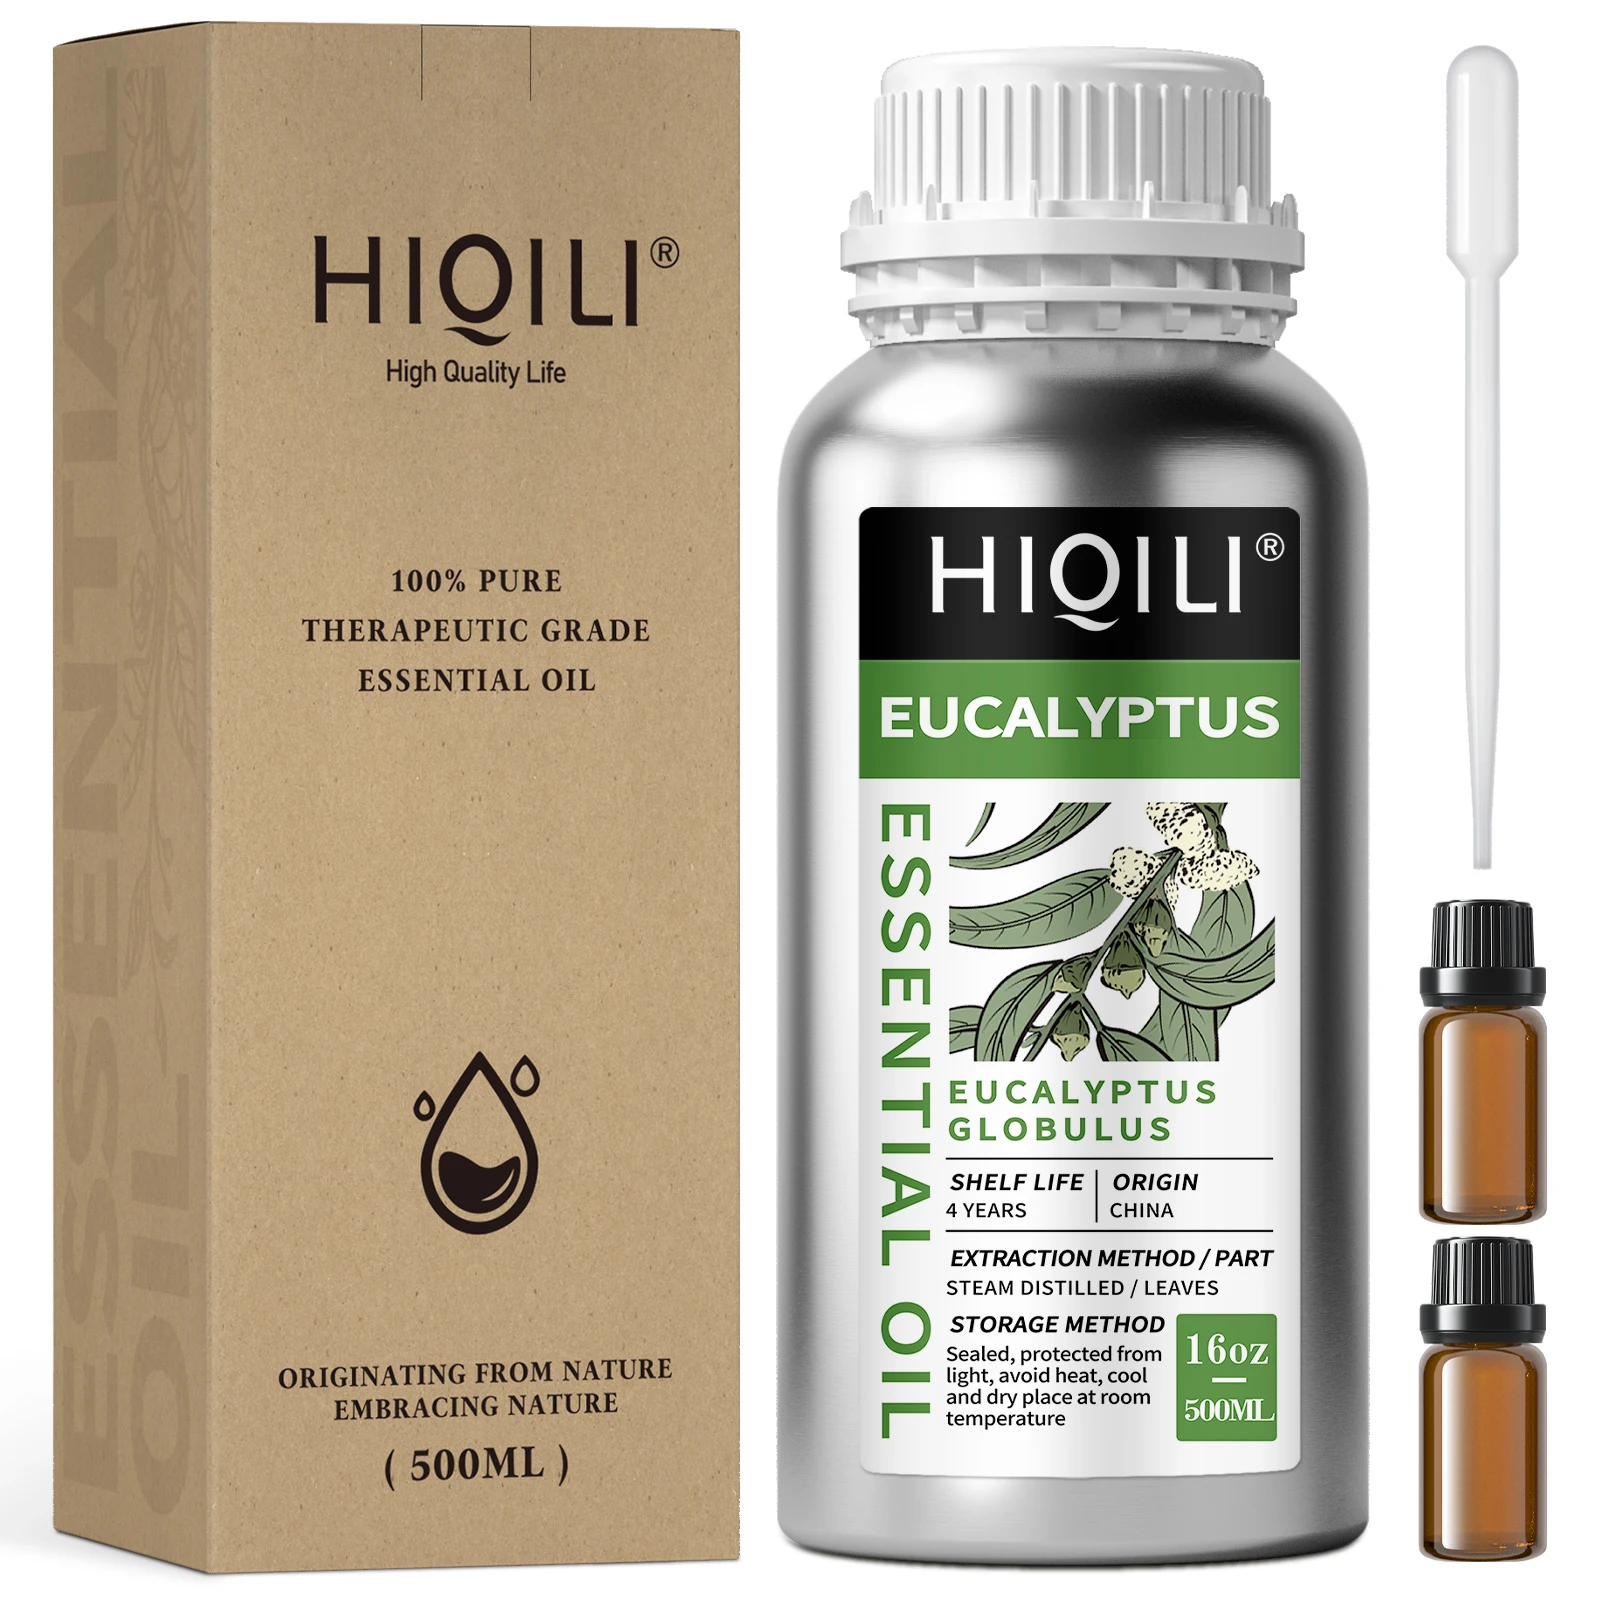 HIQILI 500ML Eucalyptus Essential Oils, 100% Pure Nature for Aromatherapy Used for Diffuser, Humidifier, Massage | Prevent Colds hotel collection essential oil scent luxury hotel inspired aromatherapy scent diffuser oil perfumes for essential oil diffusers